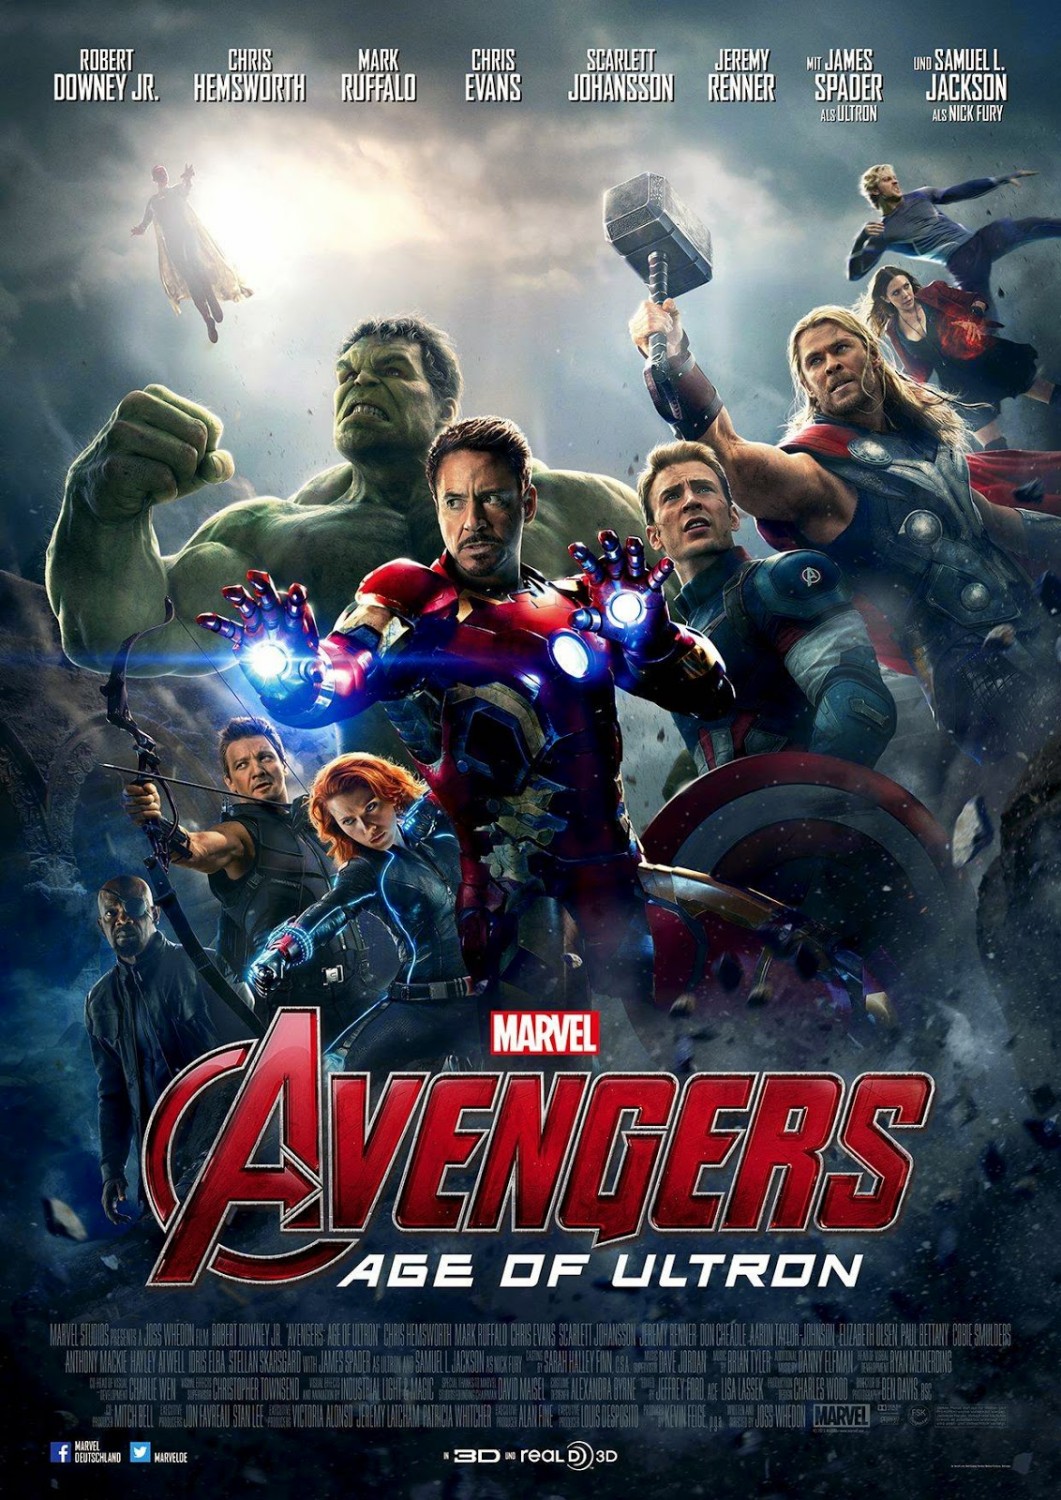 Avengers: Age of Ultron poster featuring Hulk, Iron Man, Hawkeye, Black Widwo, Captian America, Nick Fury, Thor, Scarlet Witch, Quicksilver, and the Vision. 